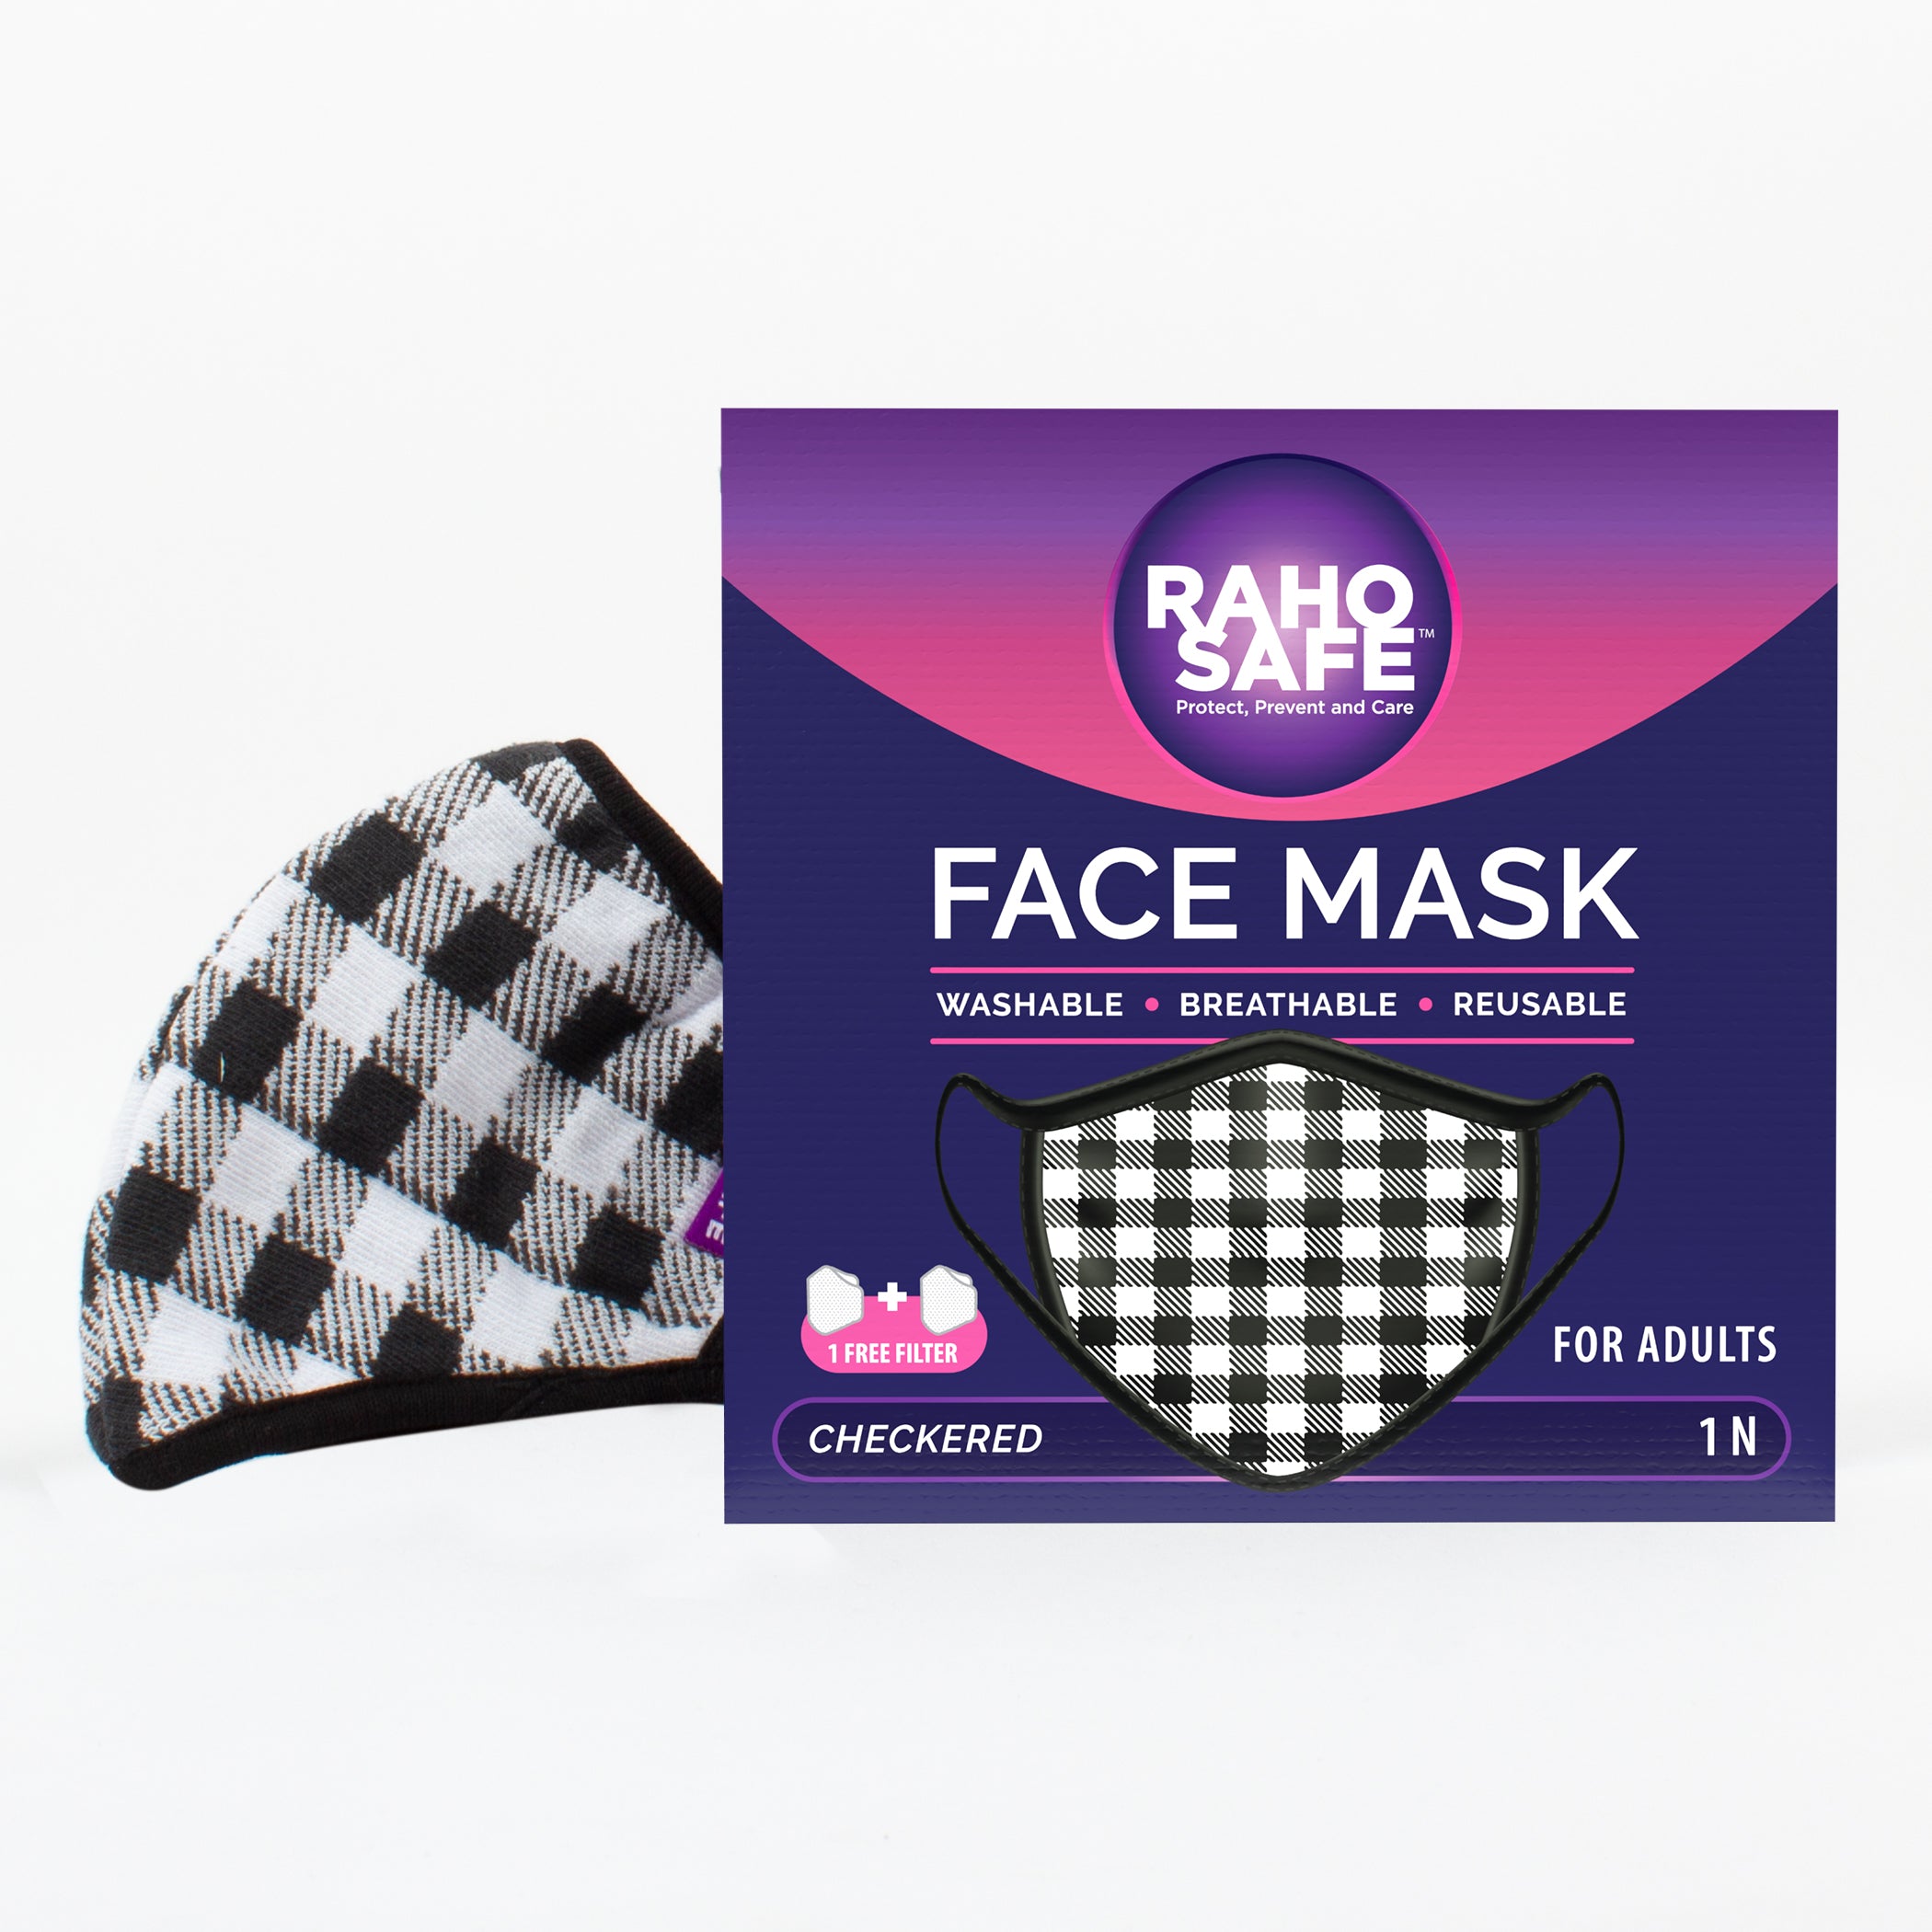 Checkered Face Mask for Adults